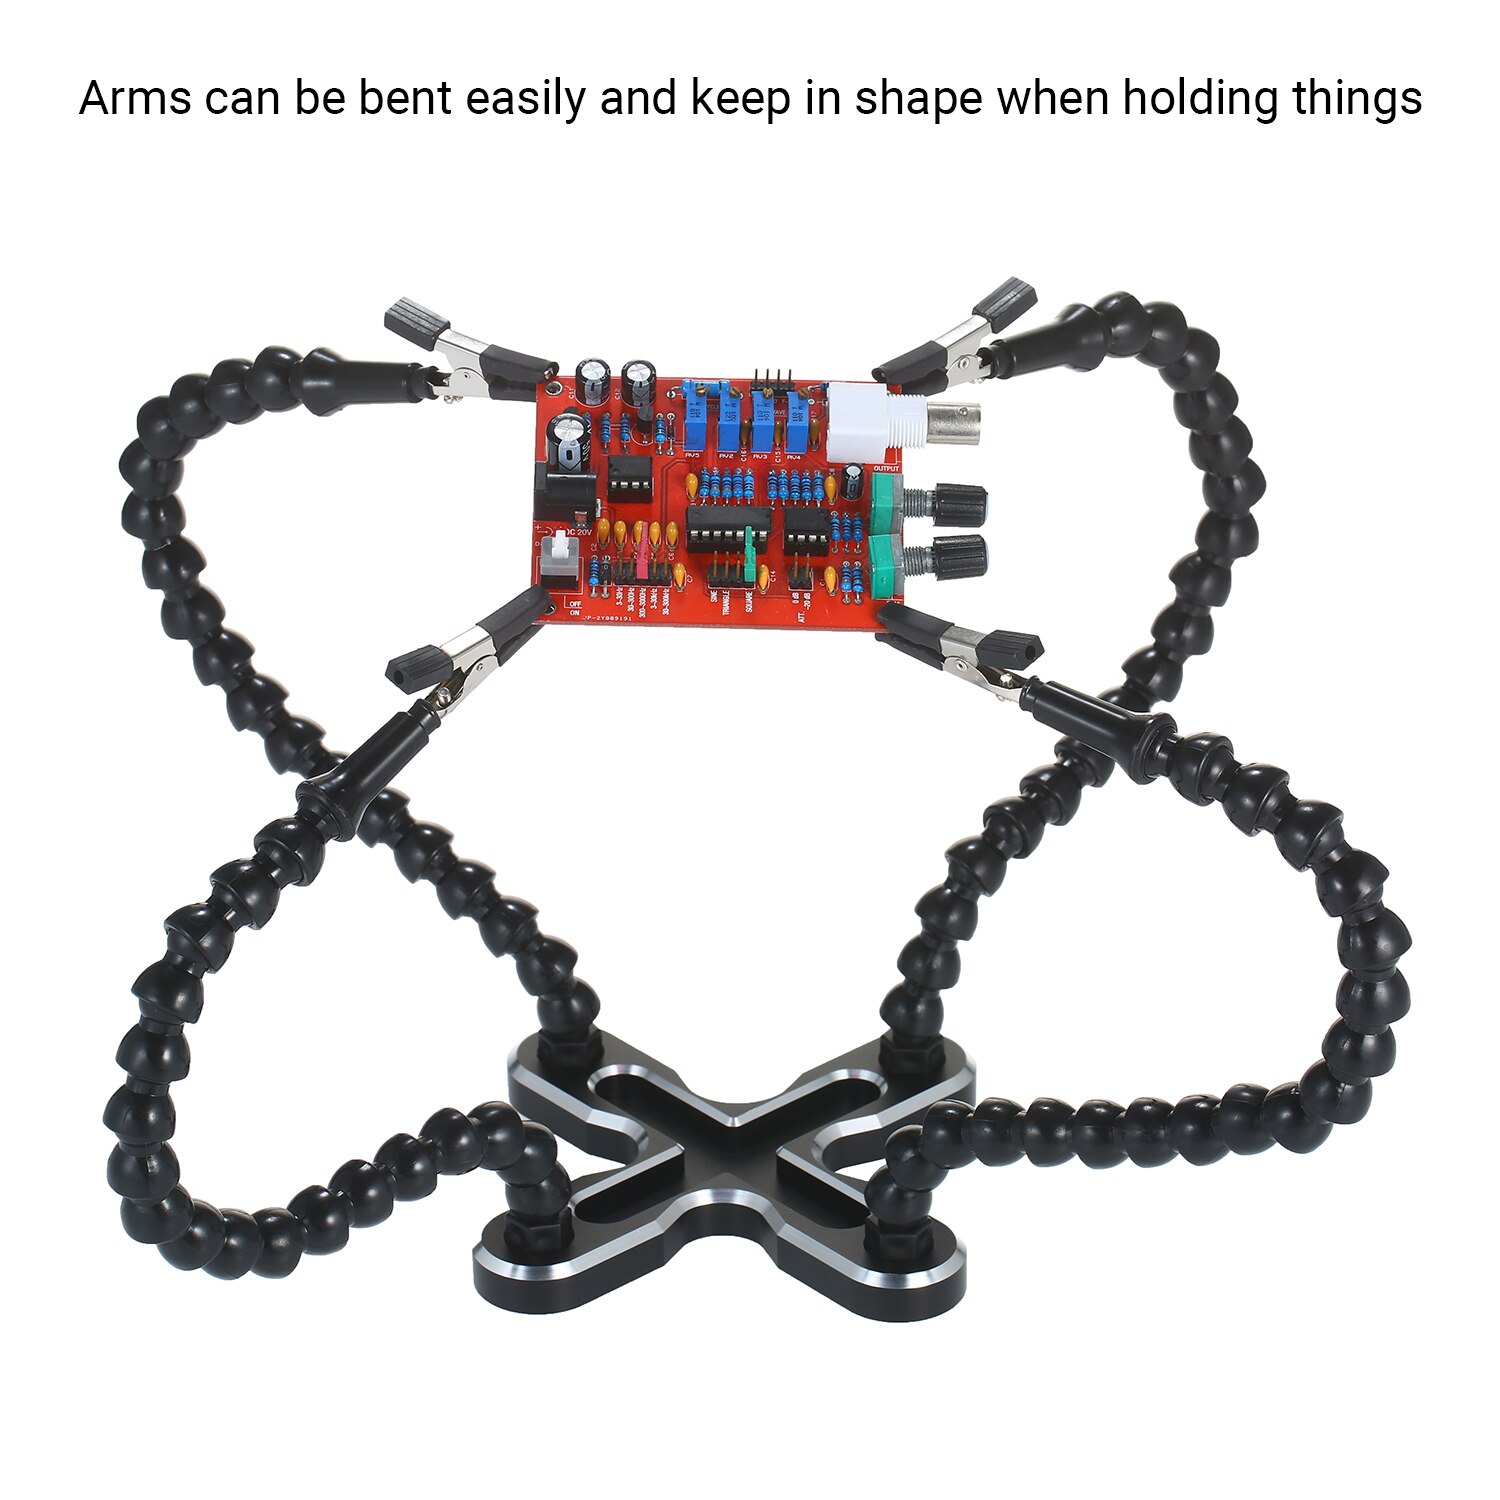 Soldering Station Welding Repair Third Hand Multifunctional Welding Tool PCB Holder Flexible 4 Arm Alloy Stand